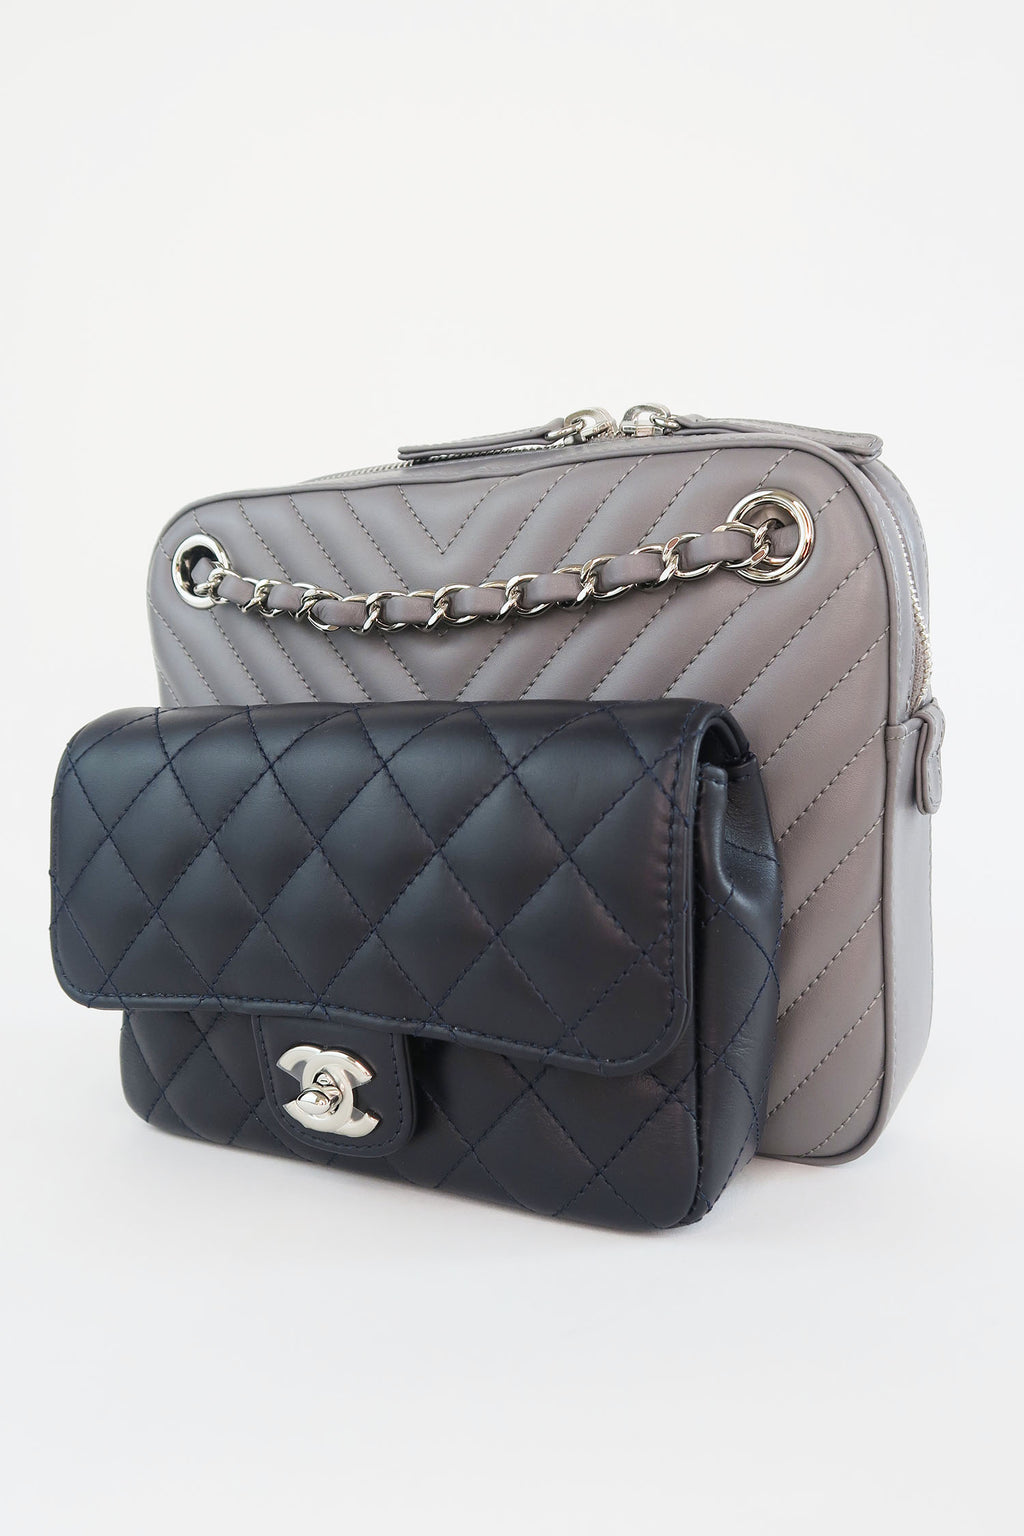 Chanel Two-Tone Quilted Shoulder Bag